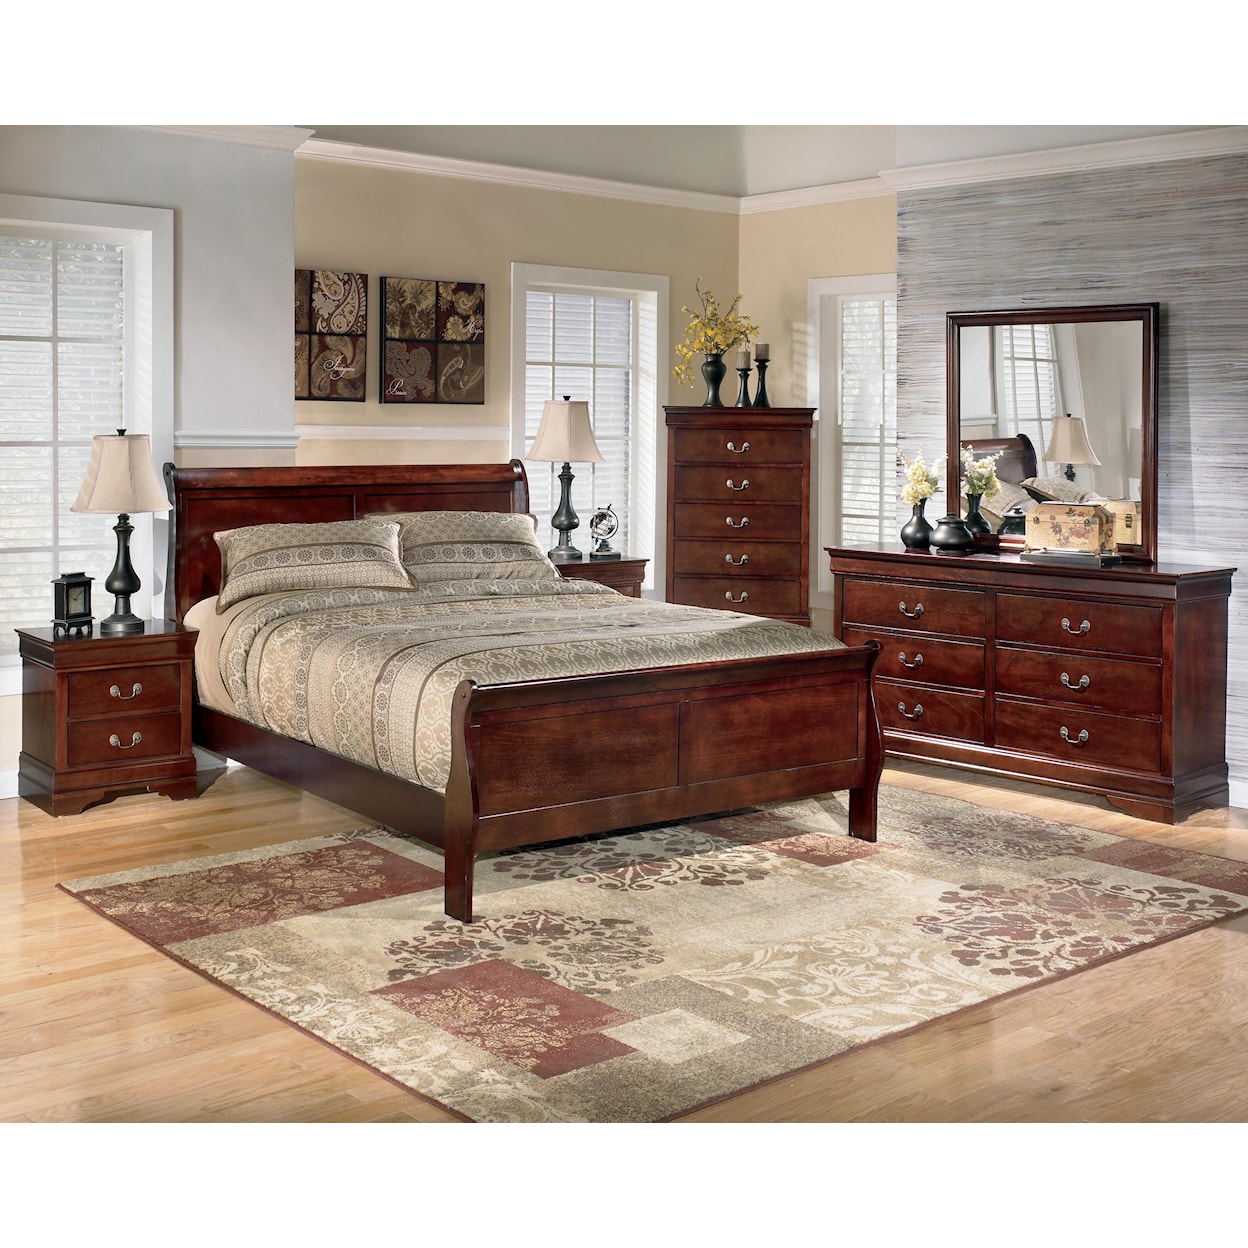 Signature Design by Ashley Alisdair 3 Piece King Bedroom Group